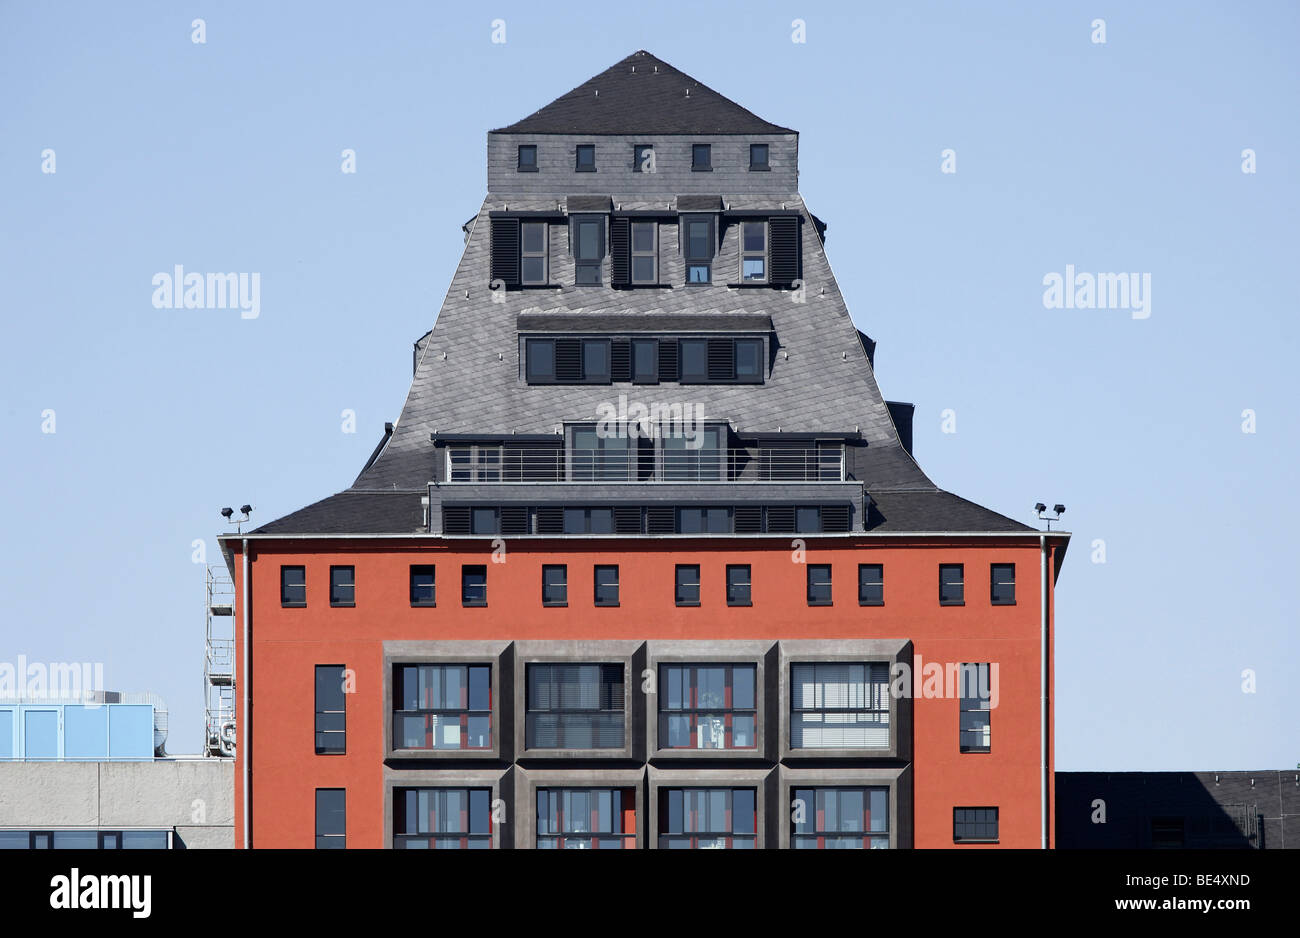 Silo 23 storehouse converted into homes and offices at the Rheinauhafen harbour, Cologne, Rhineland, North Rhine-Westphalia, Ge Stock Photo